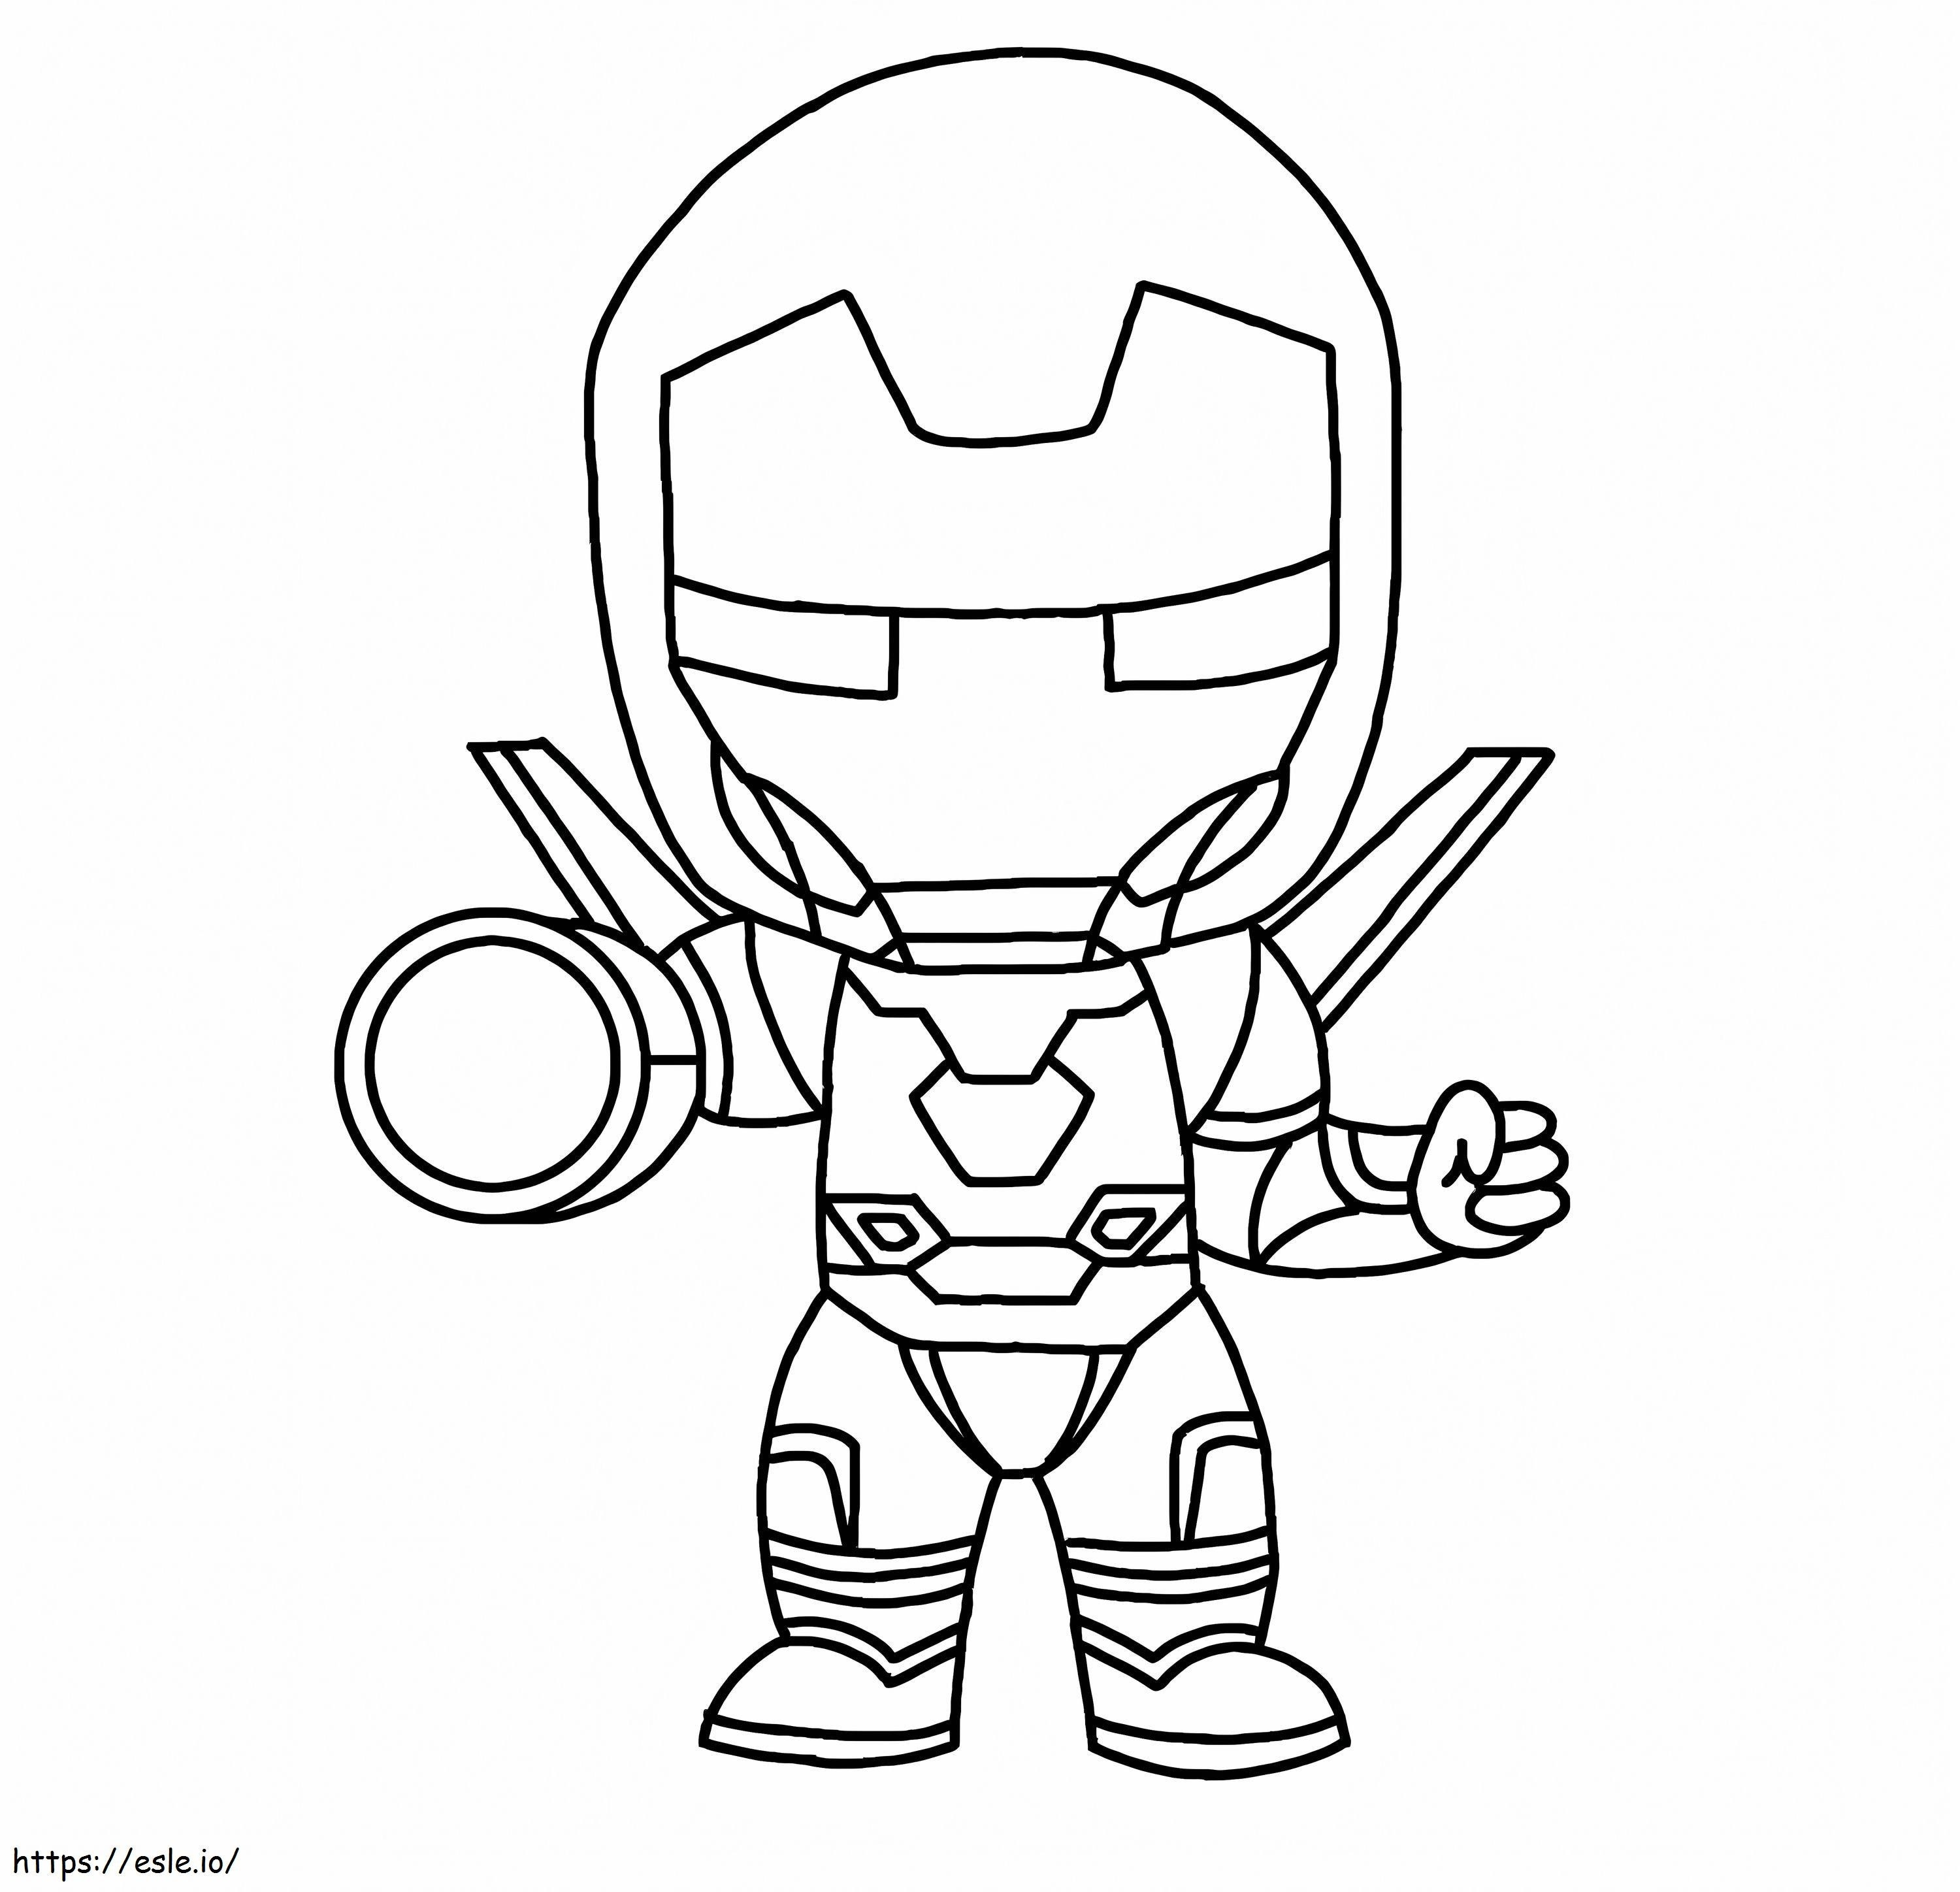 Chibi Ironman With Weapon coloring page